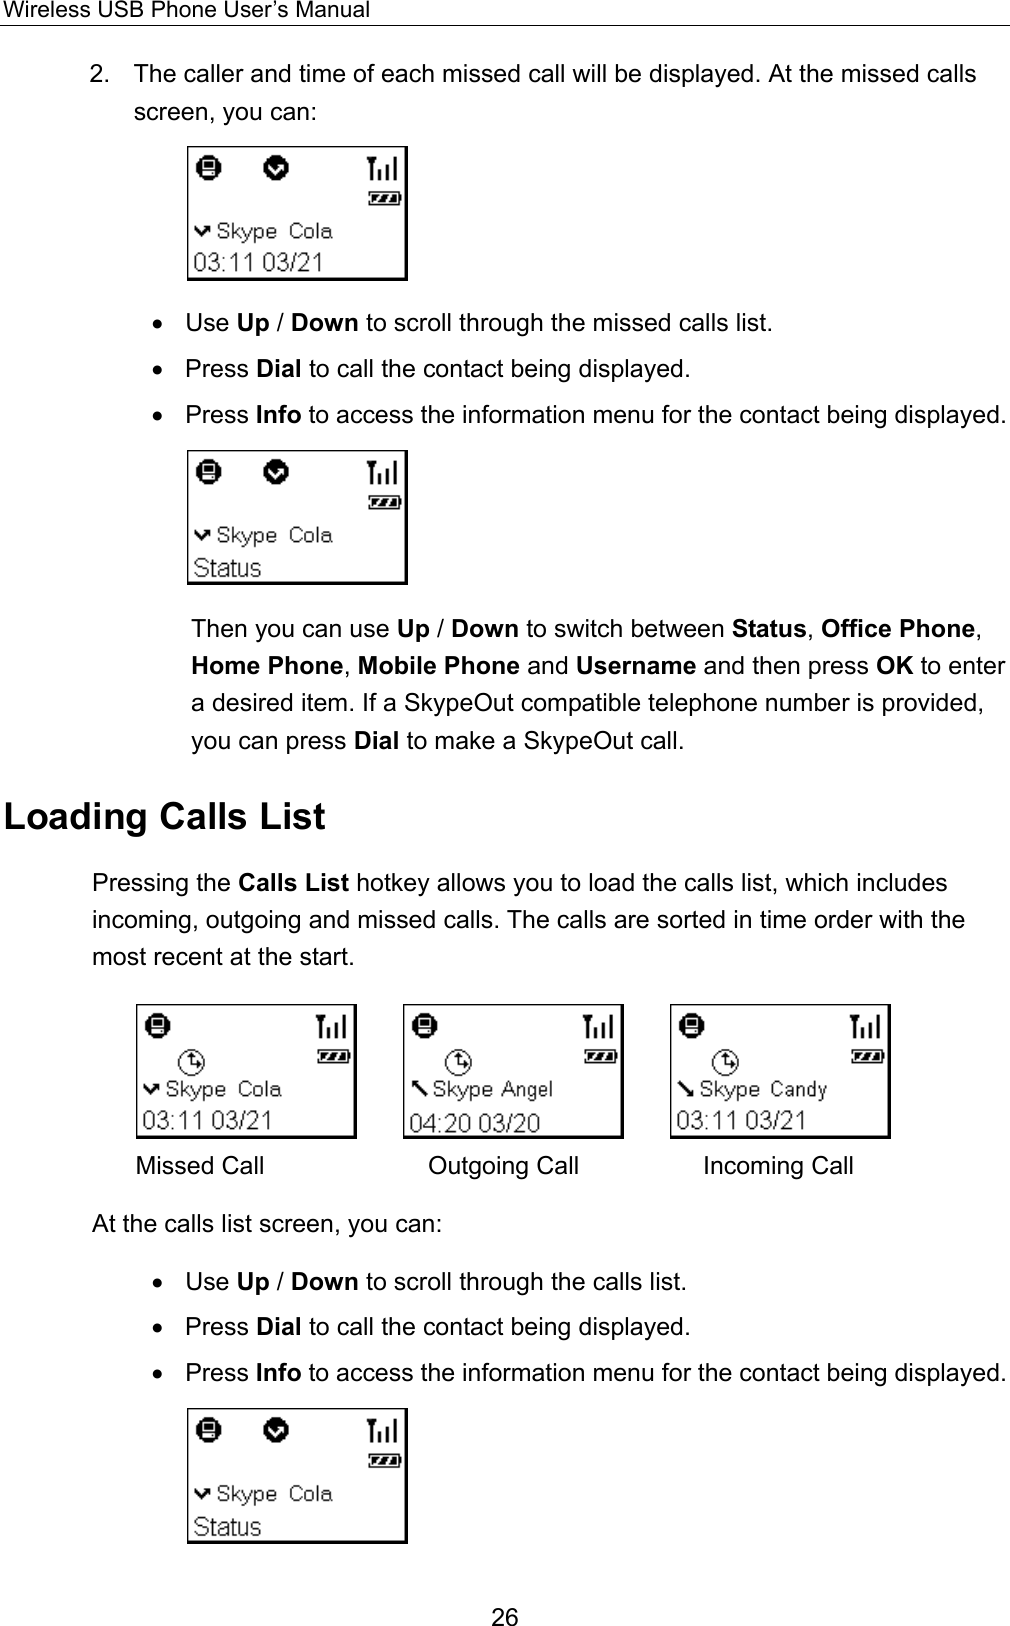 Wireless USB Phone User’s Manual 2.  The caller and time of each missed call will be displayed. At the missed calls screen, you can:  •  Use Up / Down to scroll through the missed calls list. •  Press Dial to call the contact being displayed. •  Press Info to access the information menu for the contact being displayed.  Then you can use Up / Down to switch between Status, Office Phone, Home Phone, Mobile Phone and Username and then press OK to enter a desired item. If a SkypeOut compatible telephone number is provided, you can press Dial to make a SkypeOut call. Loading Calls List Pressing the Calls List hotkey allows you to load the calls list, which includes incoming, outgoing and missed calls. The calls are sorted in time order with the most recent at the start.              Missed Call          Outgoing Call          Incoming Call At the calls list screen, you can: •  Use Up / Down to scroll through the calls list. •  Press Dial to call the contact being displayed. •  Press Info to access the information menu for the contact being displayed.  26 